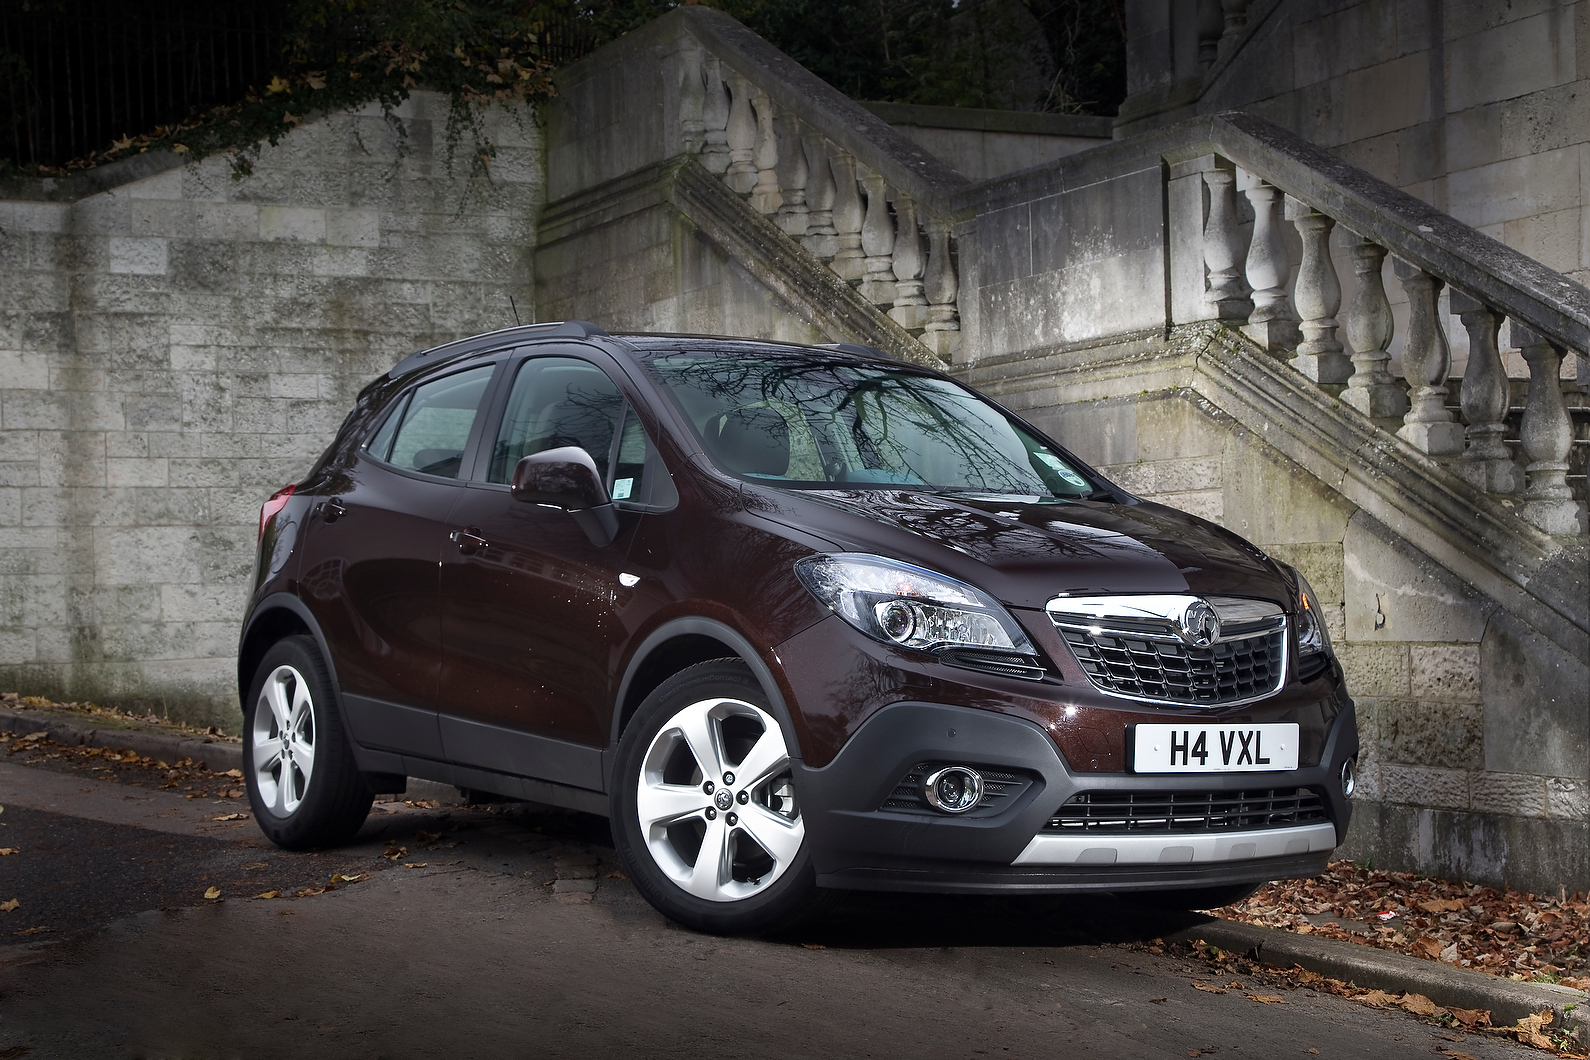 The competent and practical 3.5 star Vauxhall Mokka